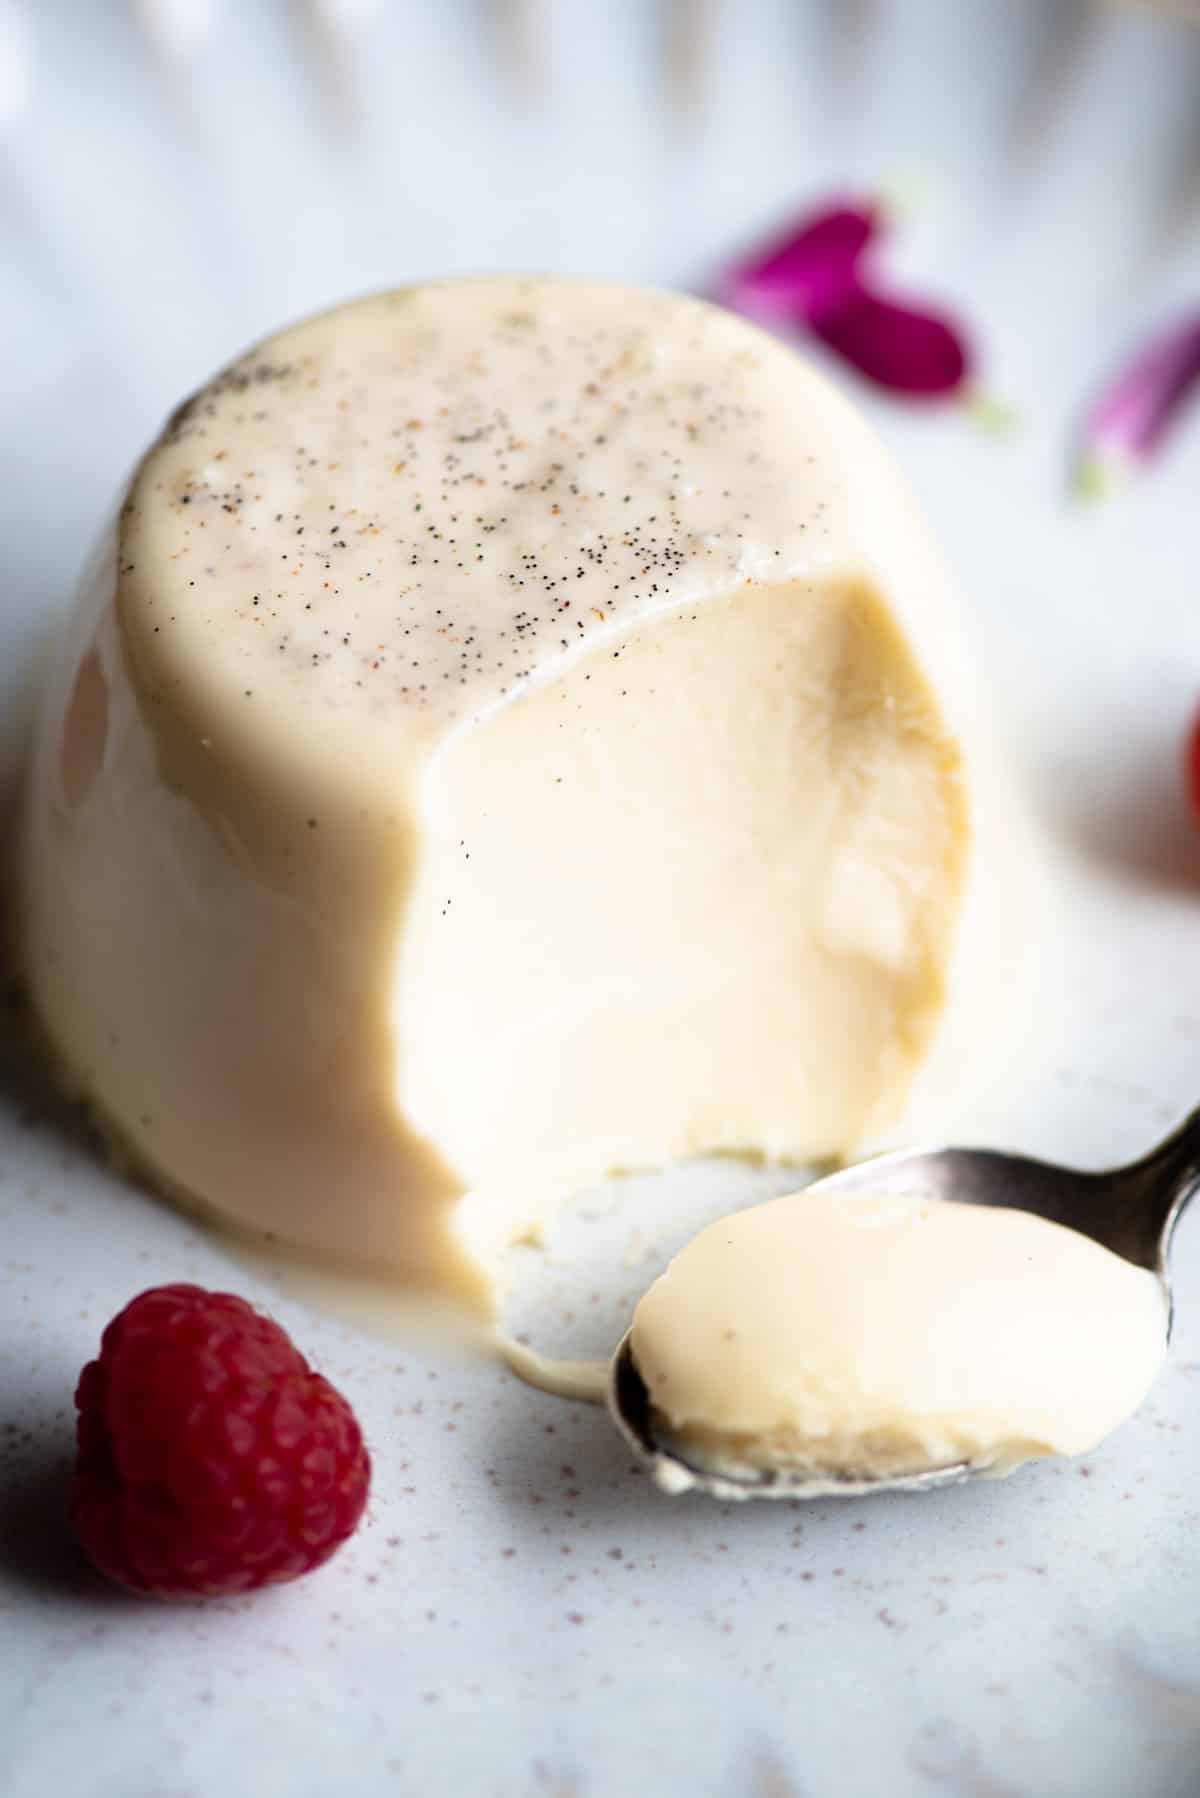 A close up of a vanilla panna cotta with a bite out and spoon at the side.